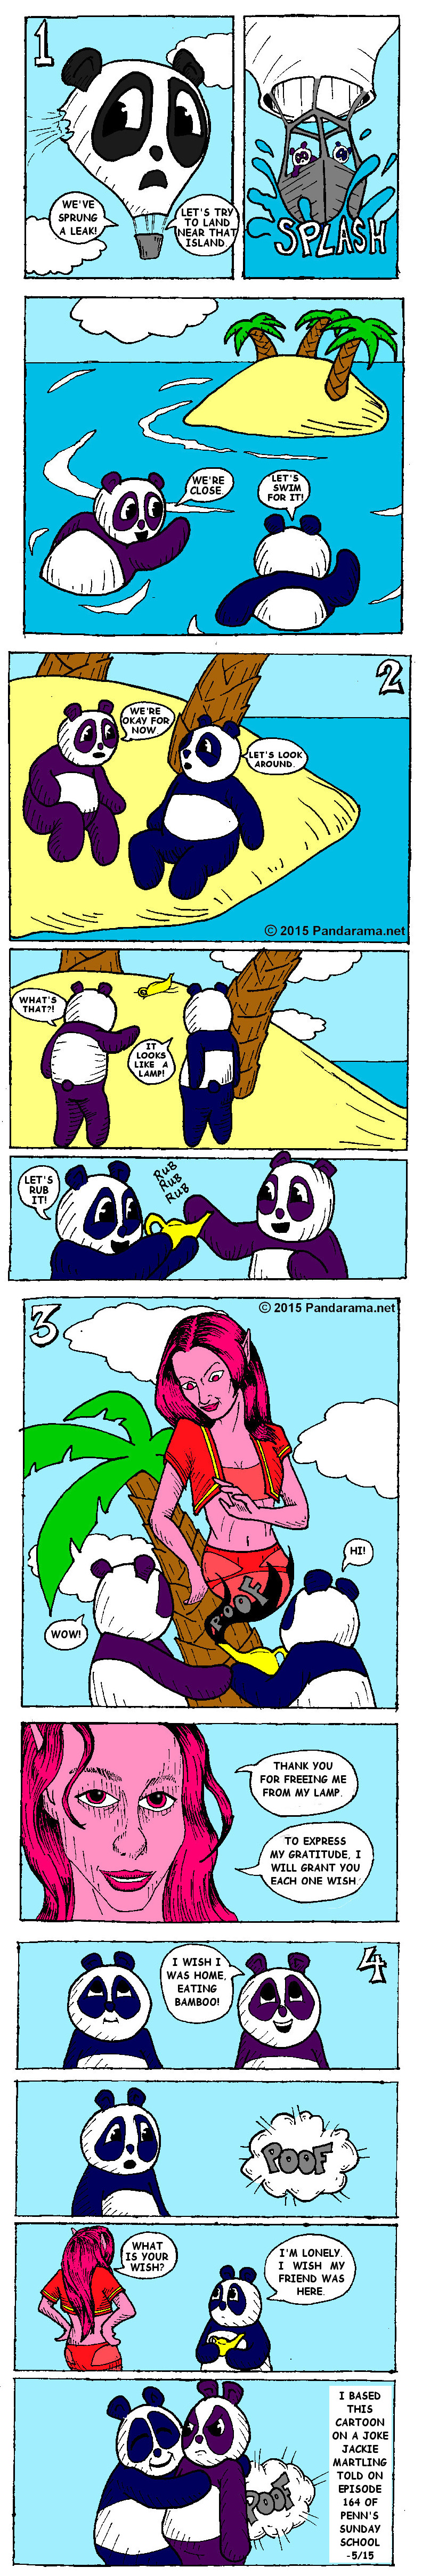 Joke about being stuck on an island, told by Jackie Martling on episode 164 of Penn's Sunday School, retold w/ pandas. Sara Stout inspired the genie.